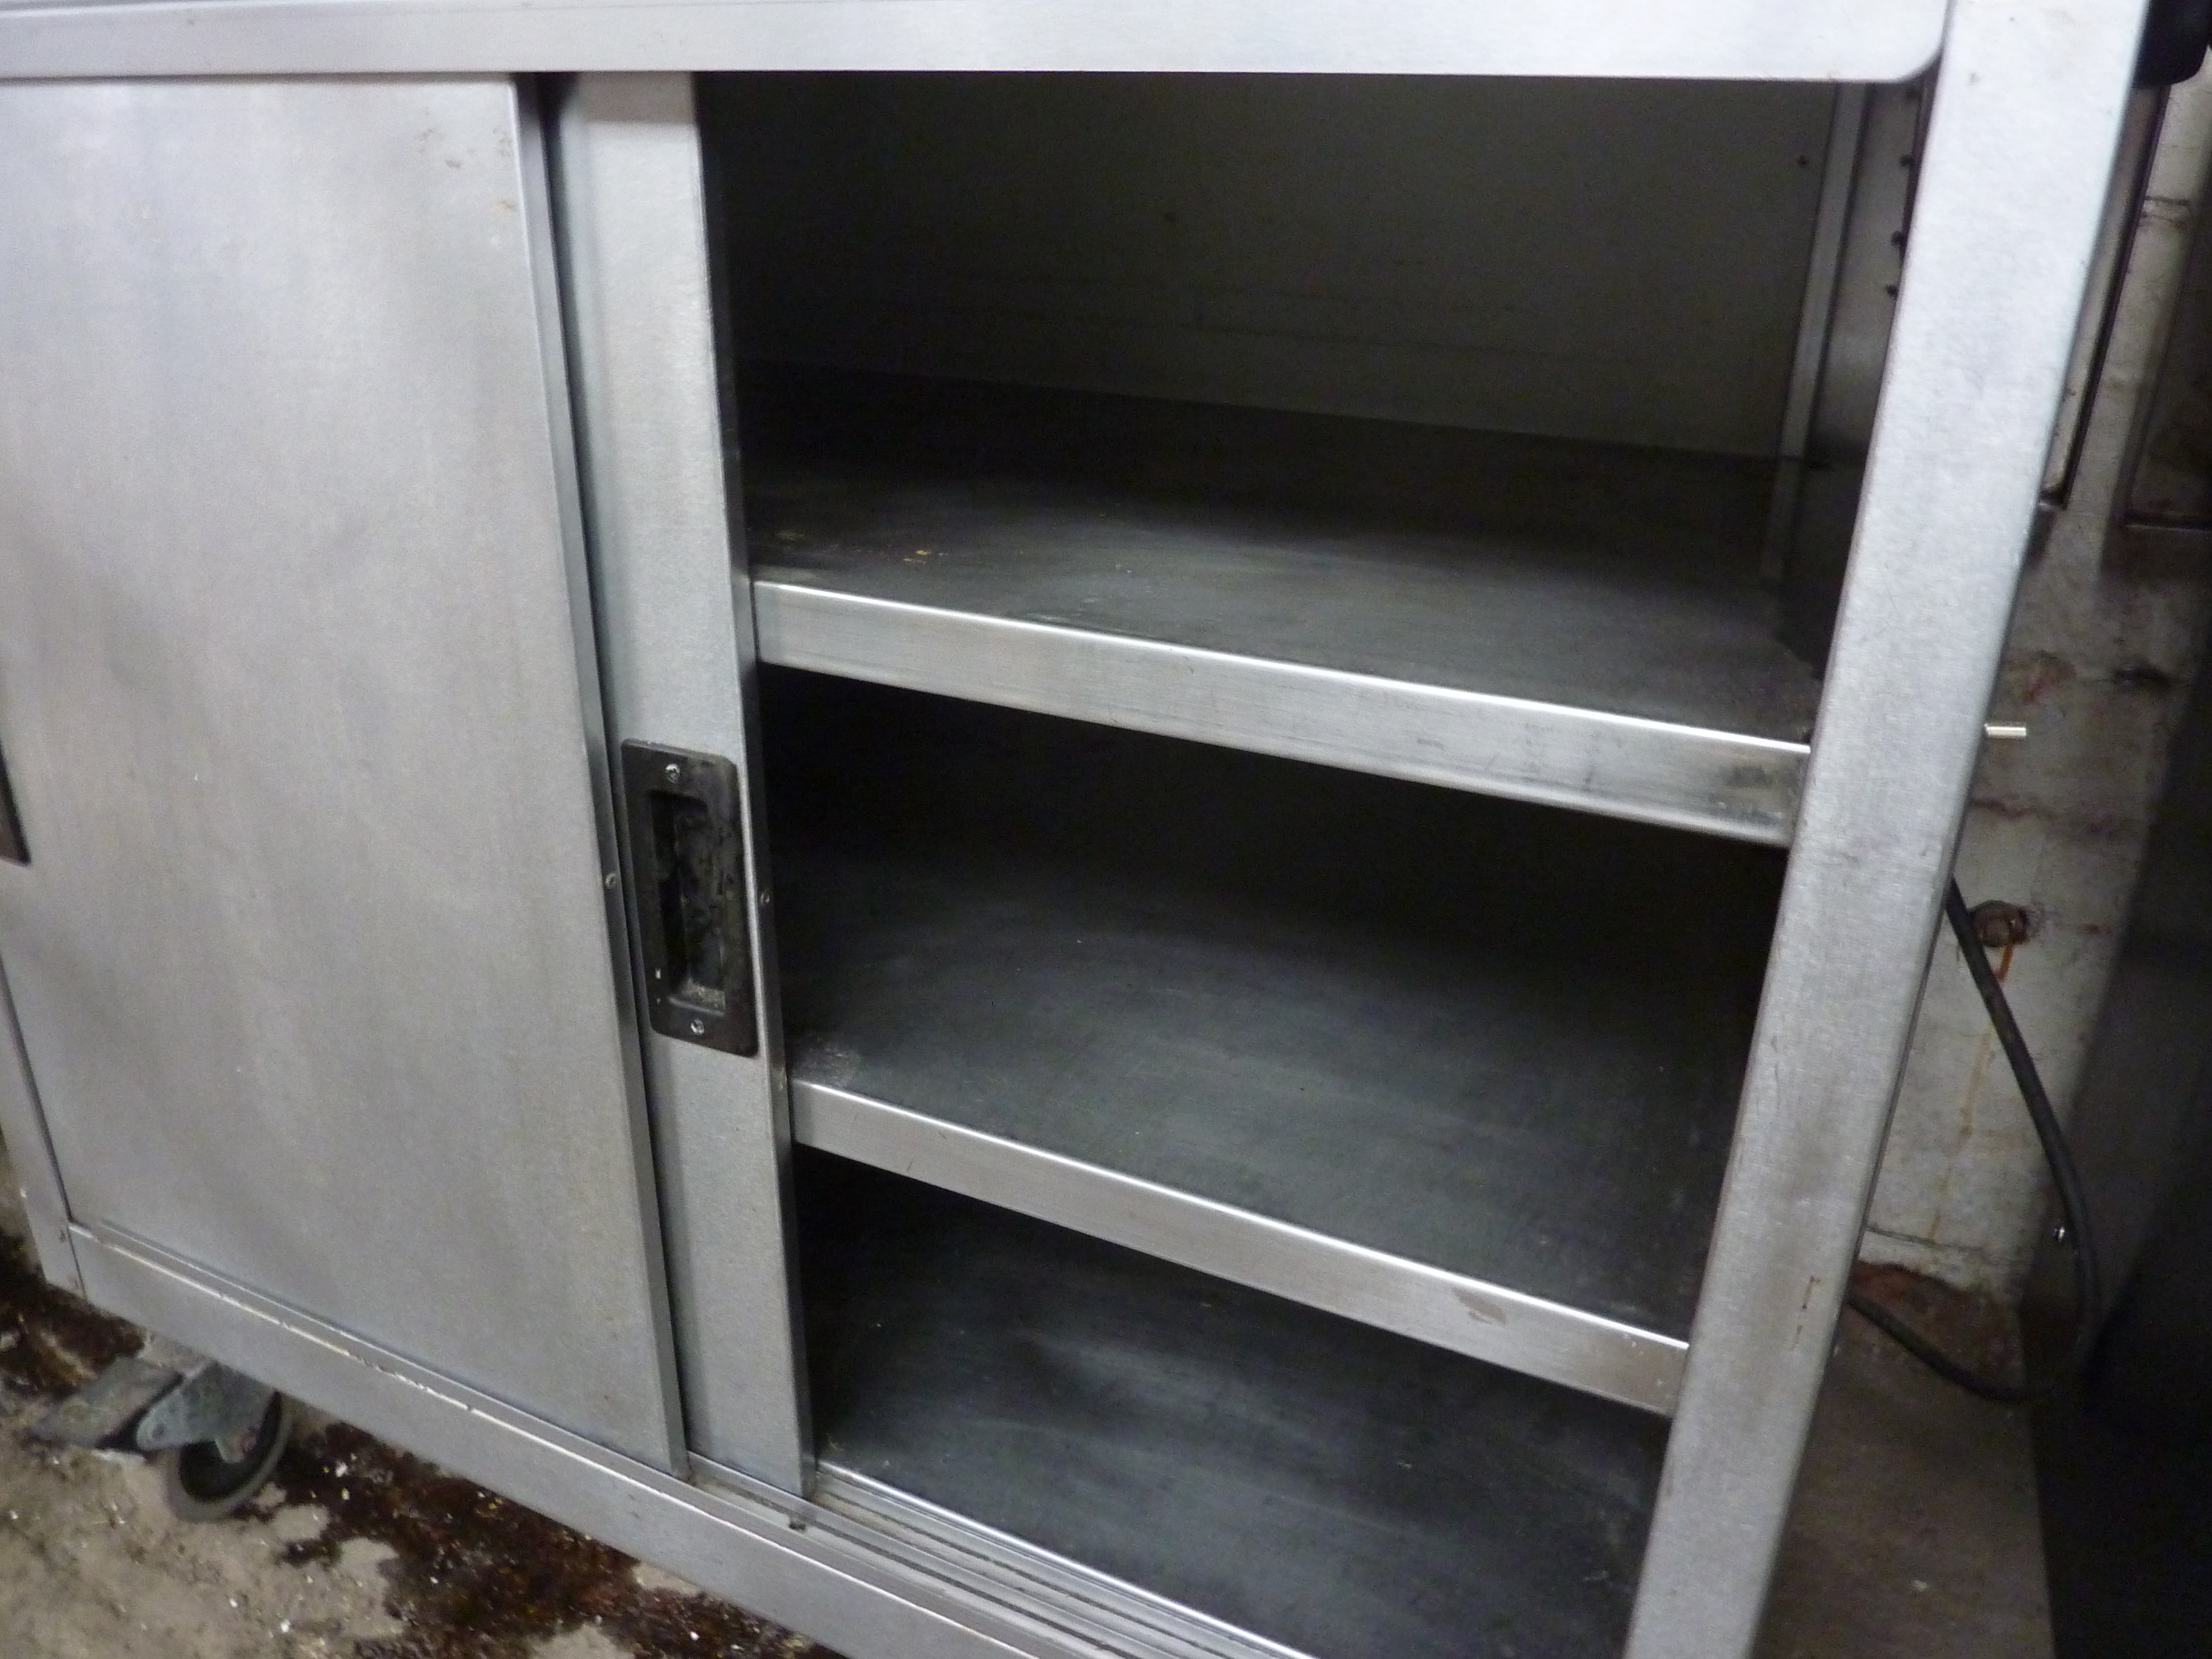 Moffat hot cupboard with sliding doors - Image 2 of 2